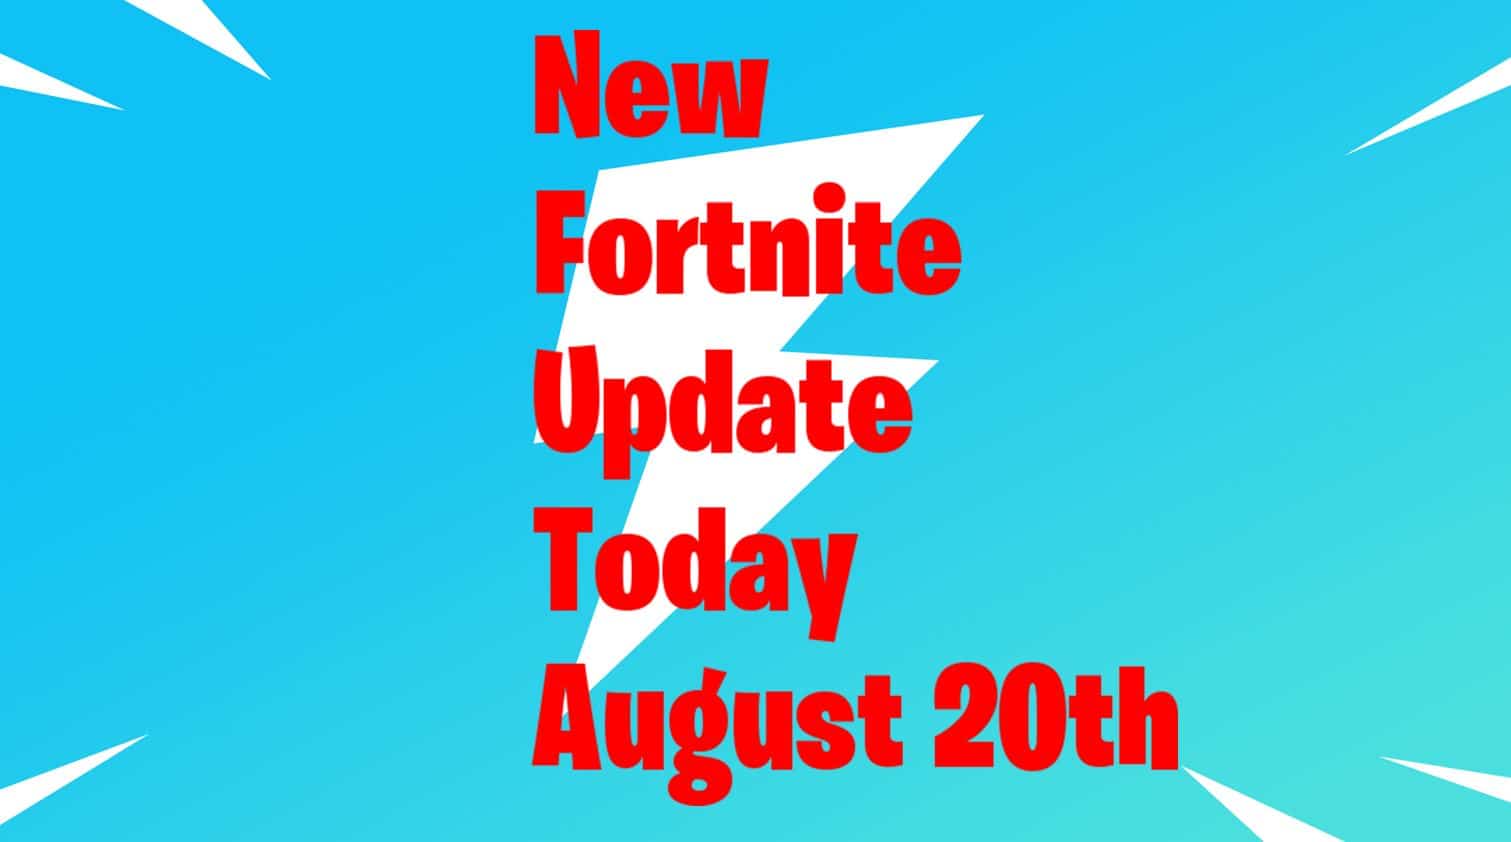 Fortnite Update Today 20th August